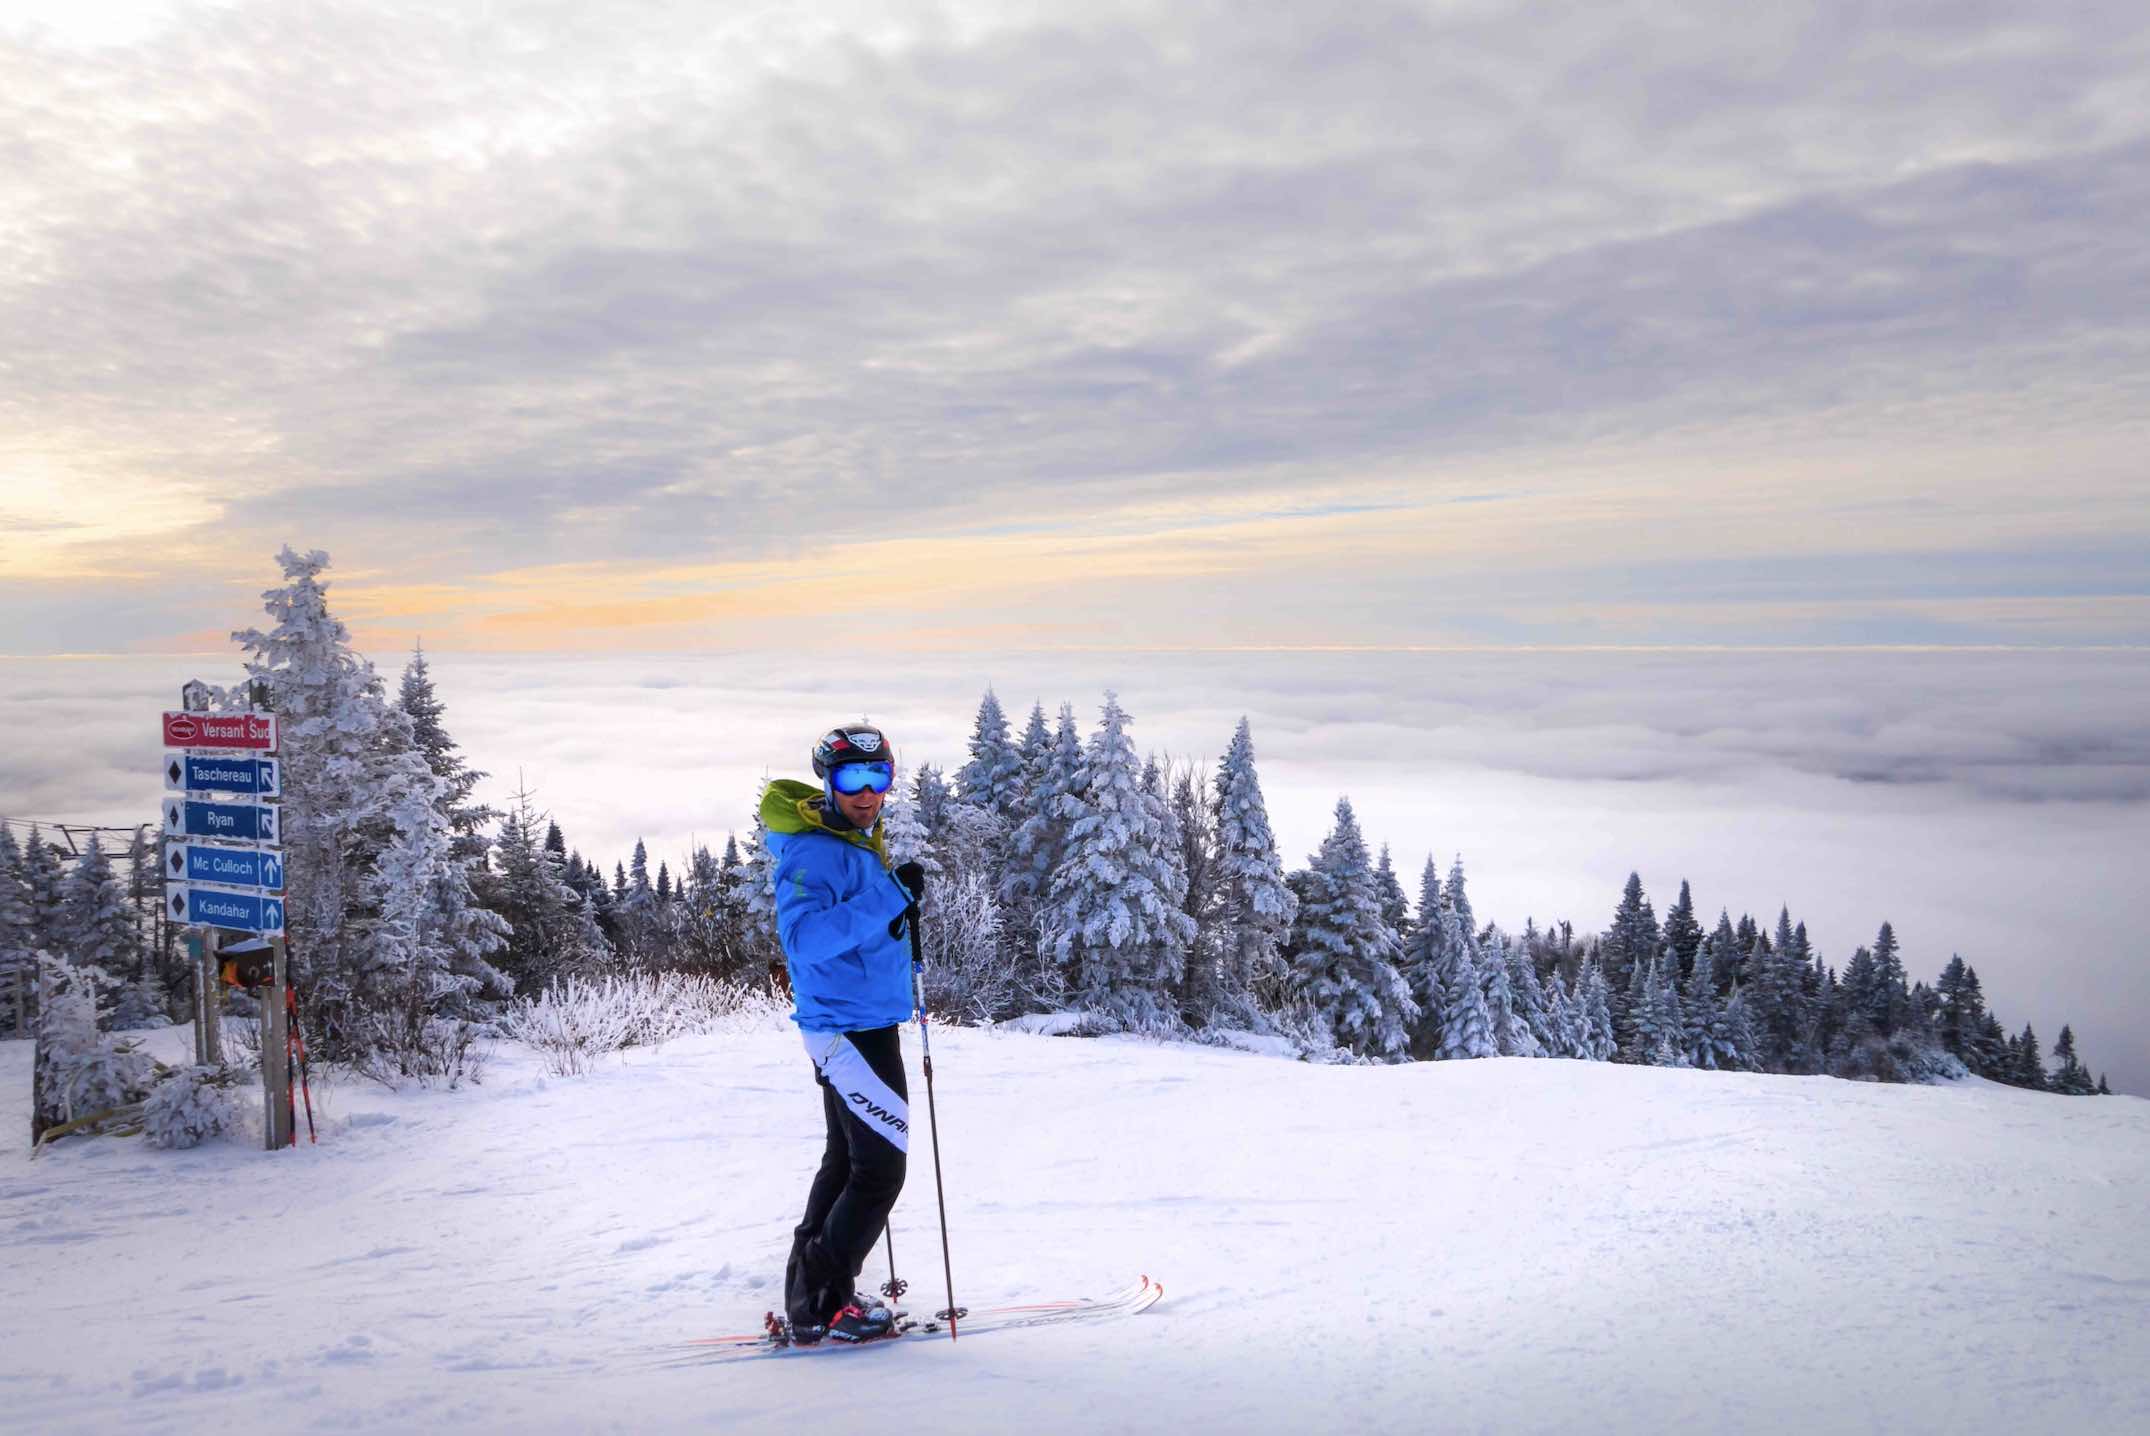 Tremblant winter things to do in Mont Tremblant with skiier at top of the mountains above clouds